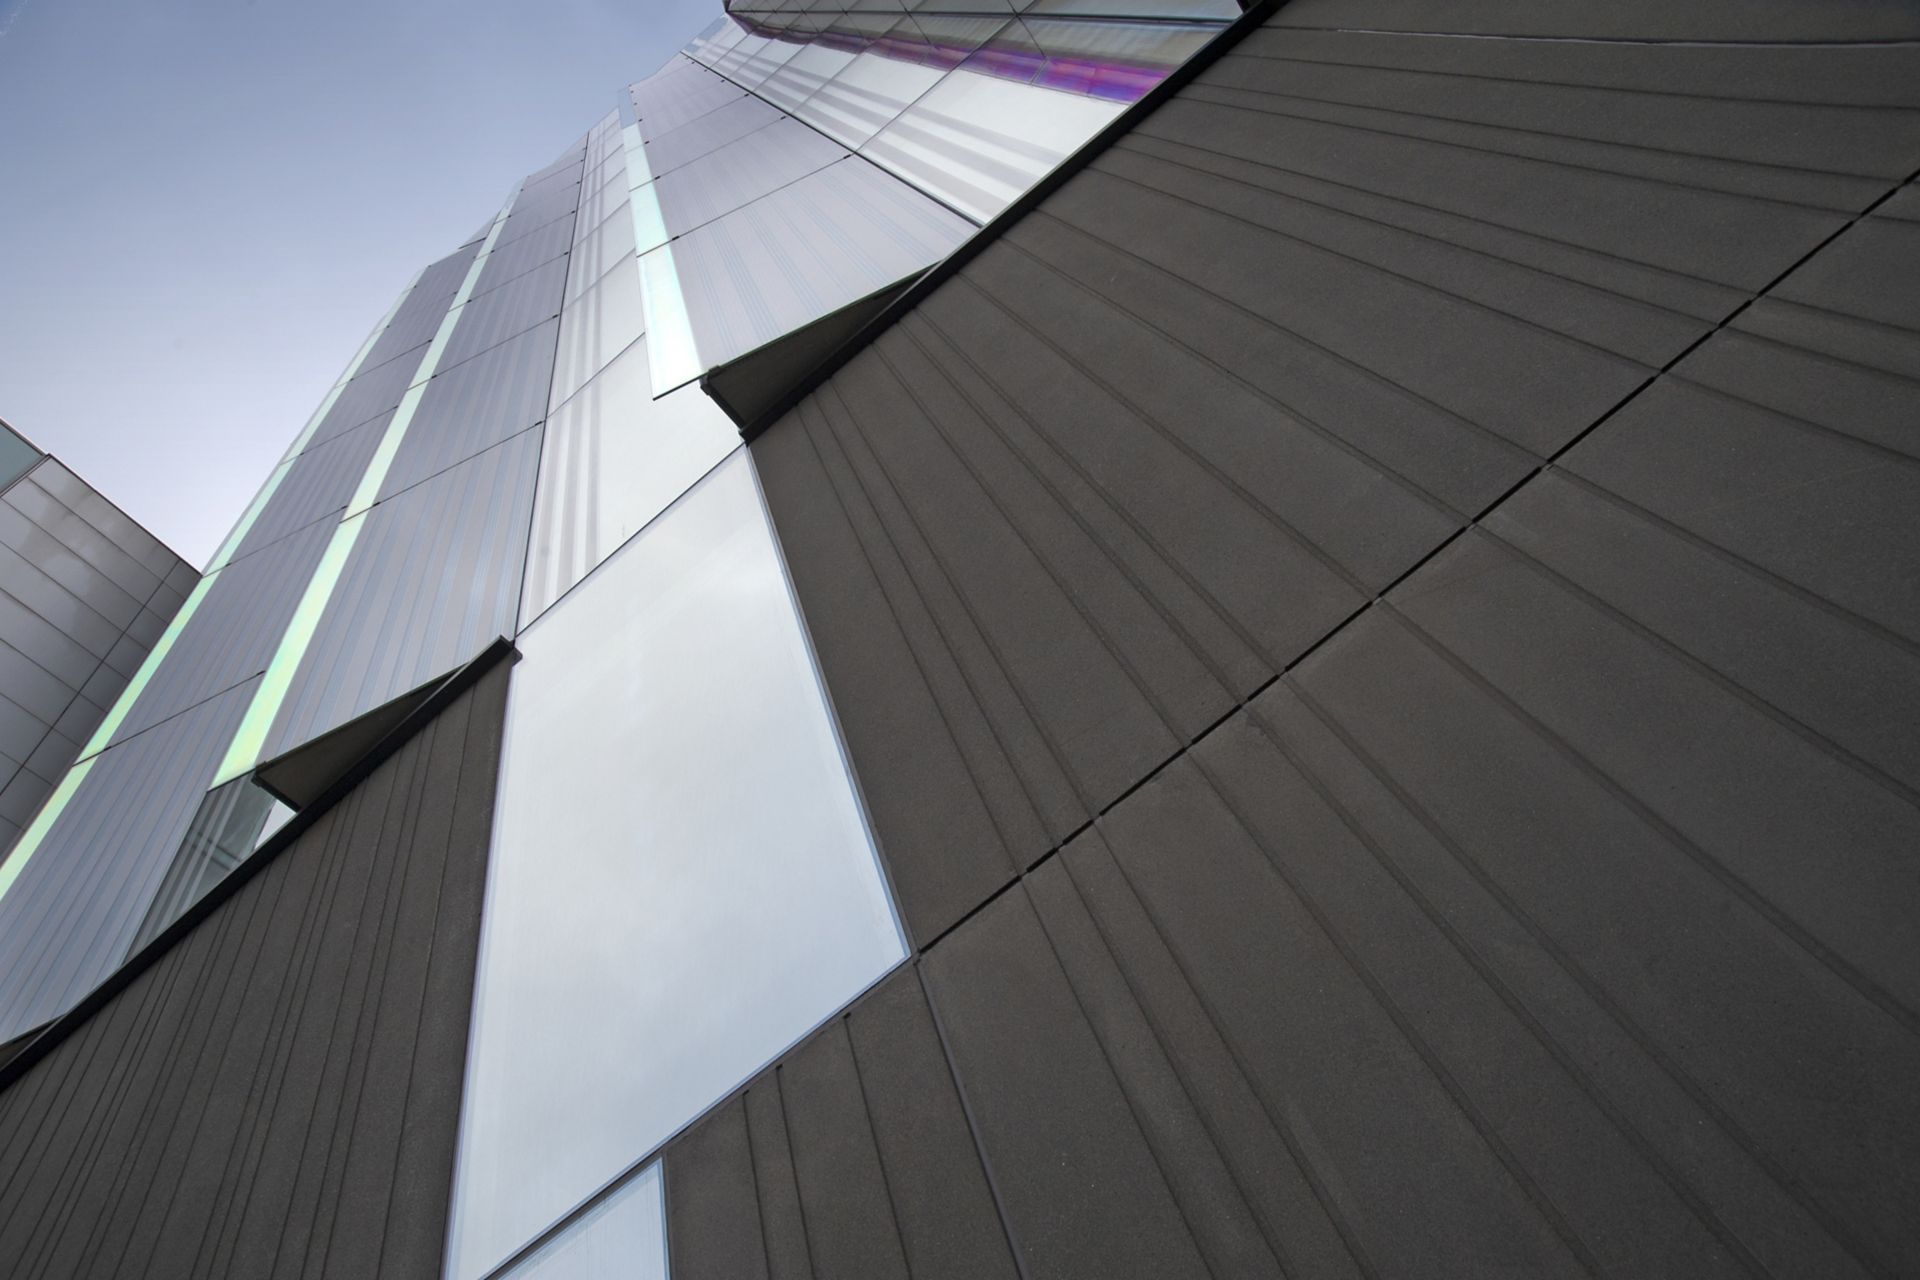 Architectural concrete facade of Manchester Metropolitan University produced with Sika concrete admixtures